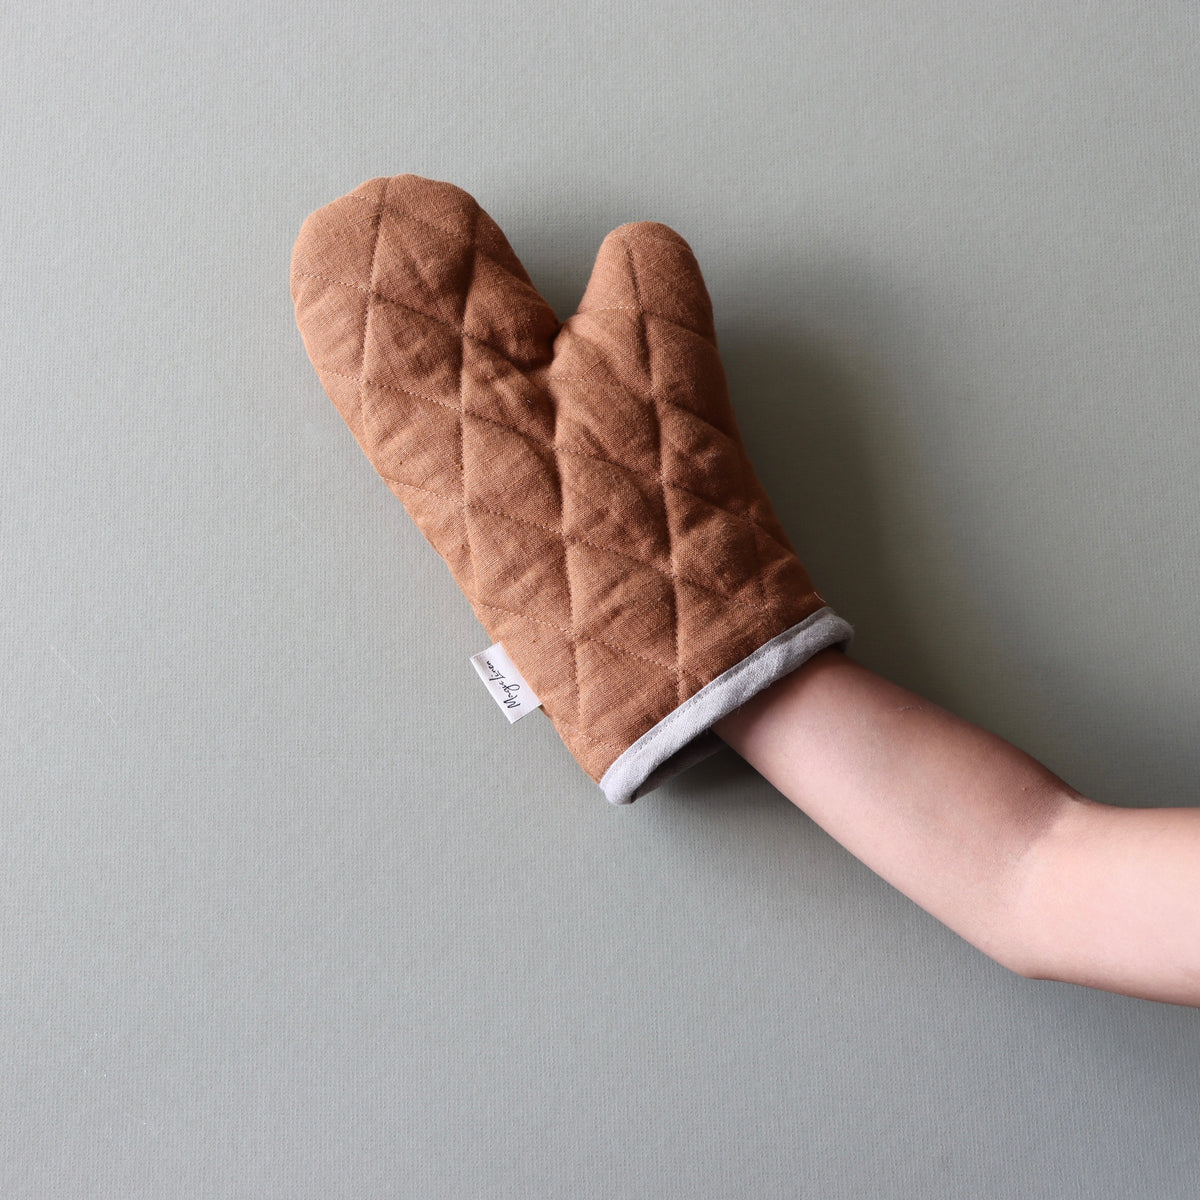 Whip-it! Oven Mitts